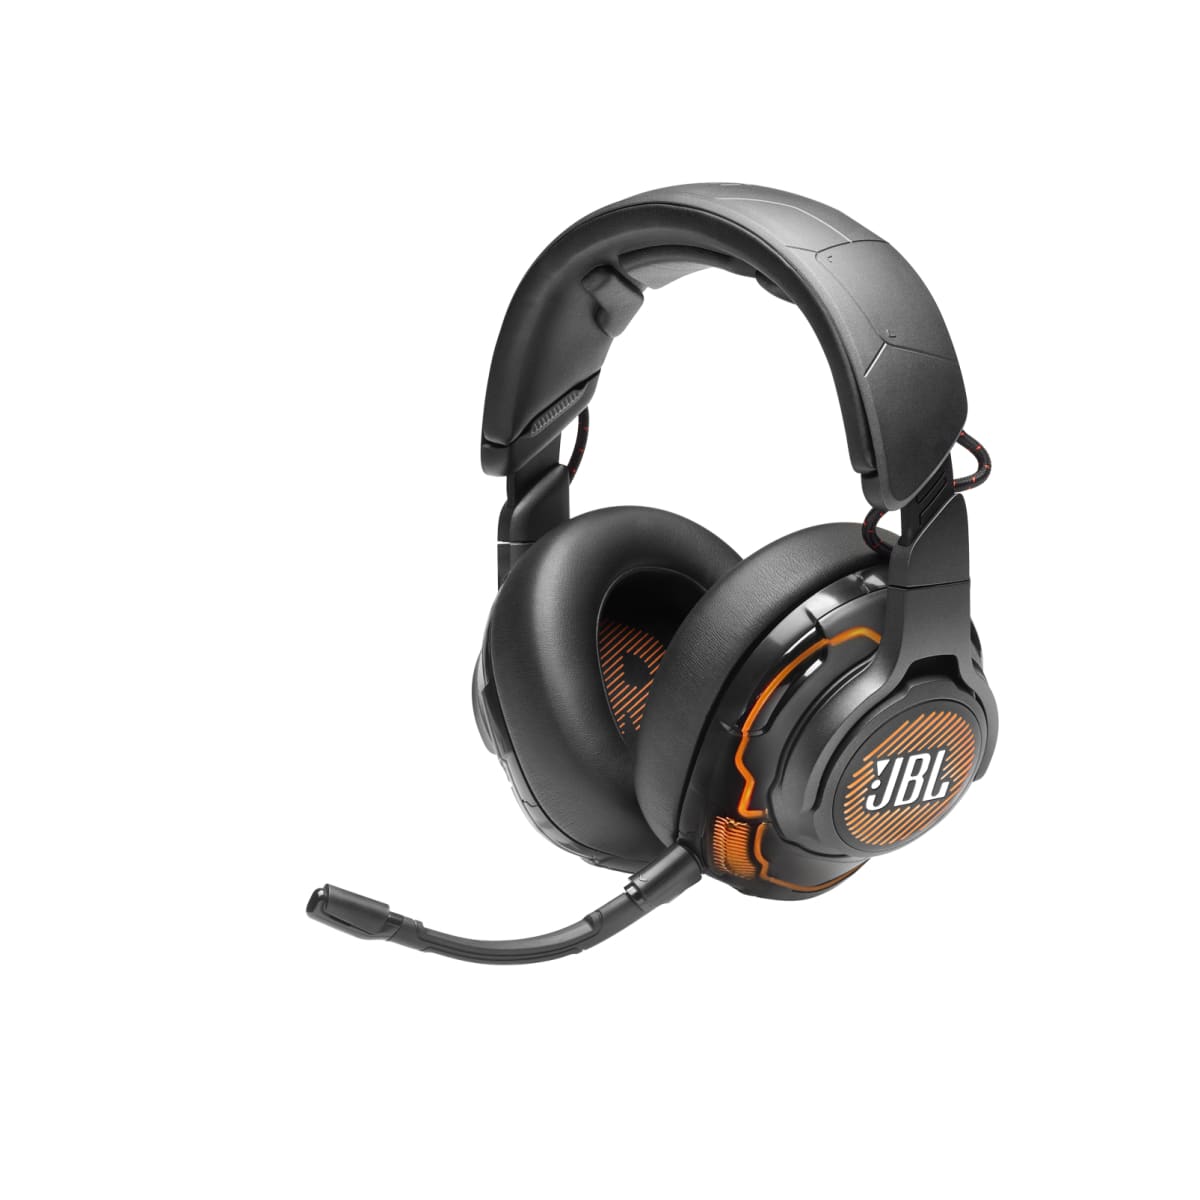 JBL Online MY - JBL Quantum ONE USB wired PC over-ear